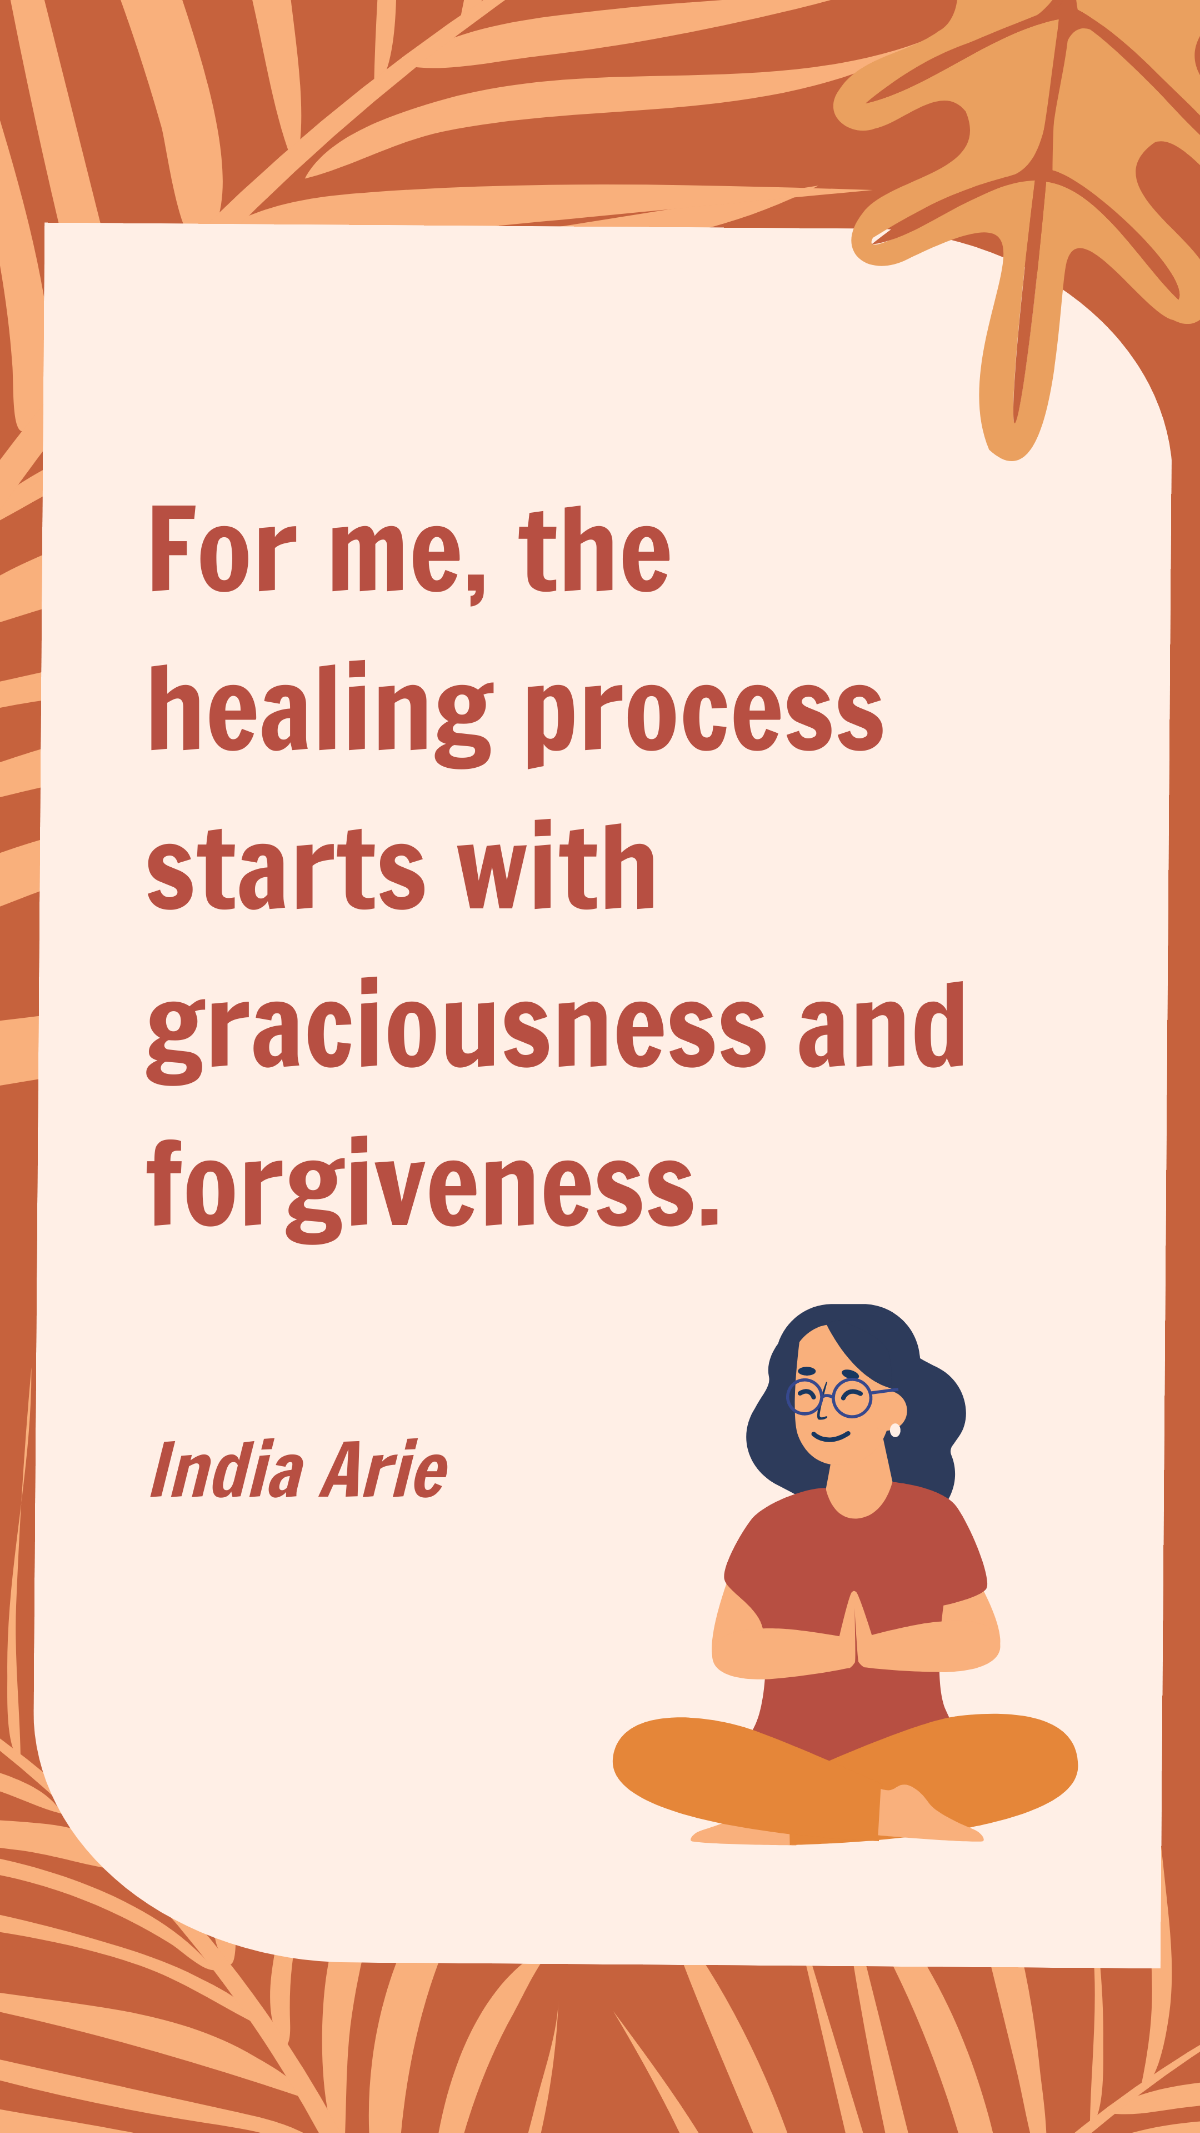 India Arie - For me, the healing process starts with graciousness and forgiveness.